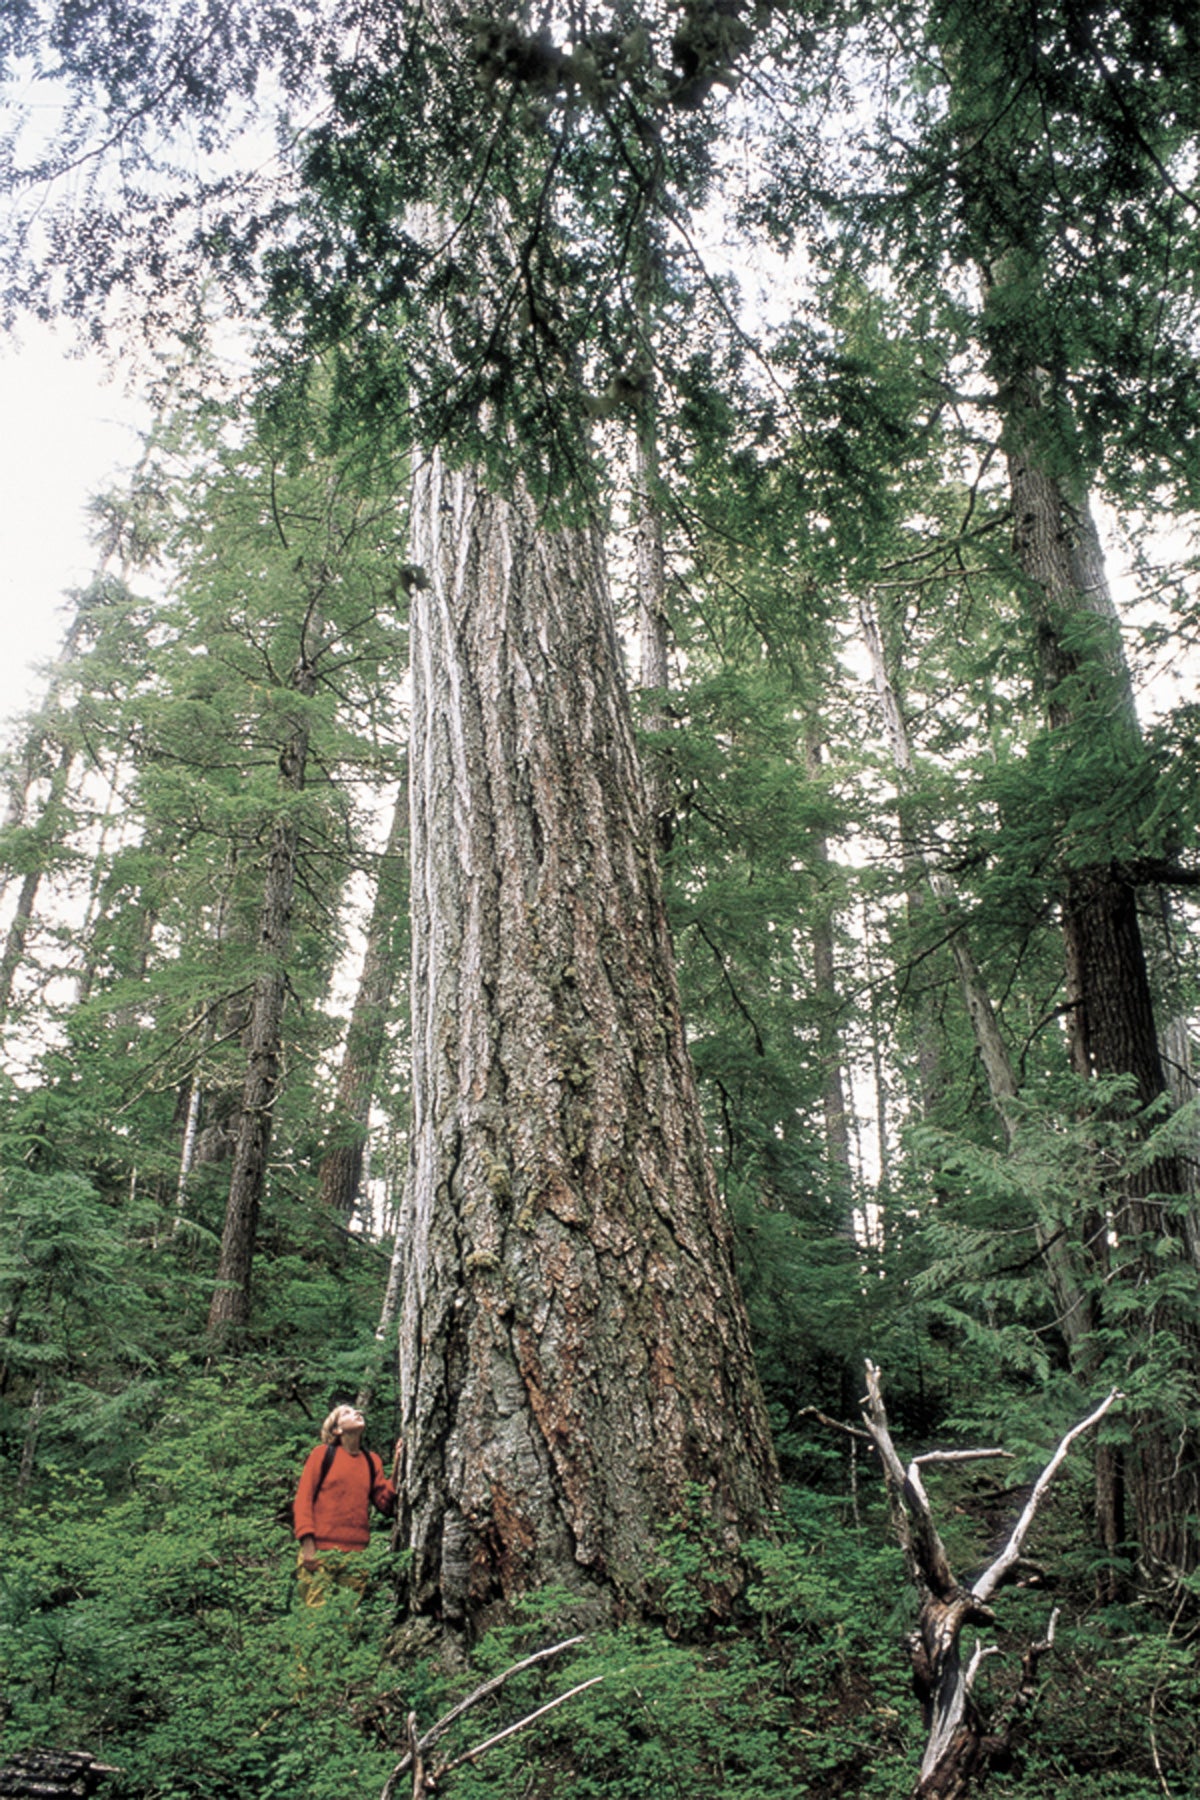 A photograph of a person standing next to a large old-growth tree. End of image description.